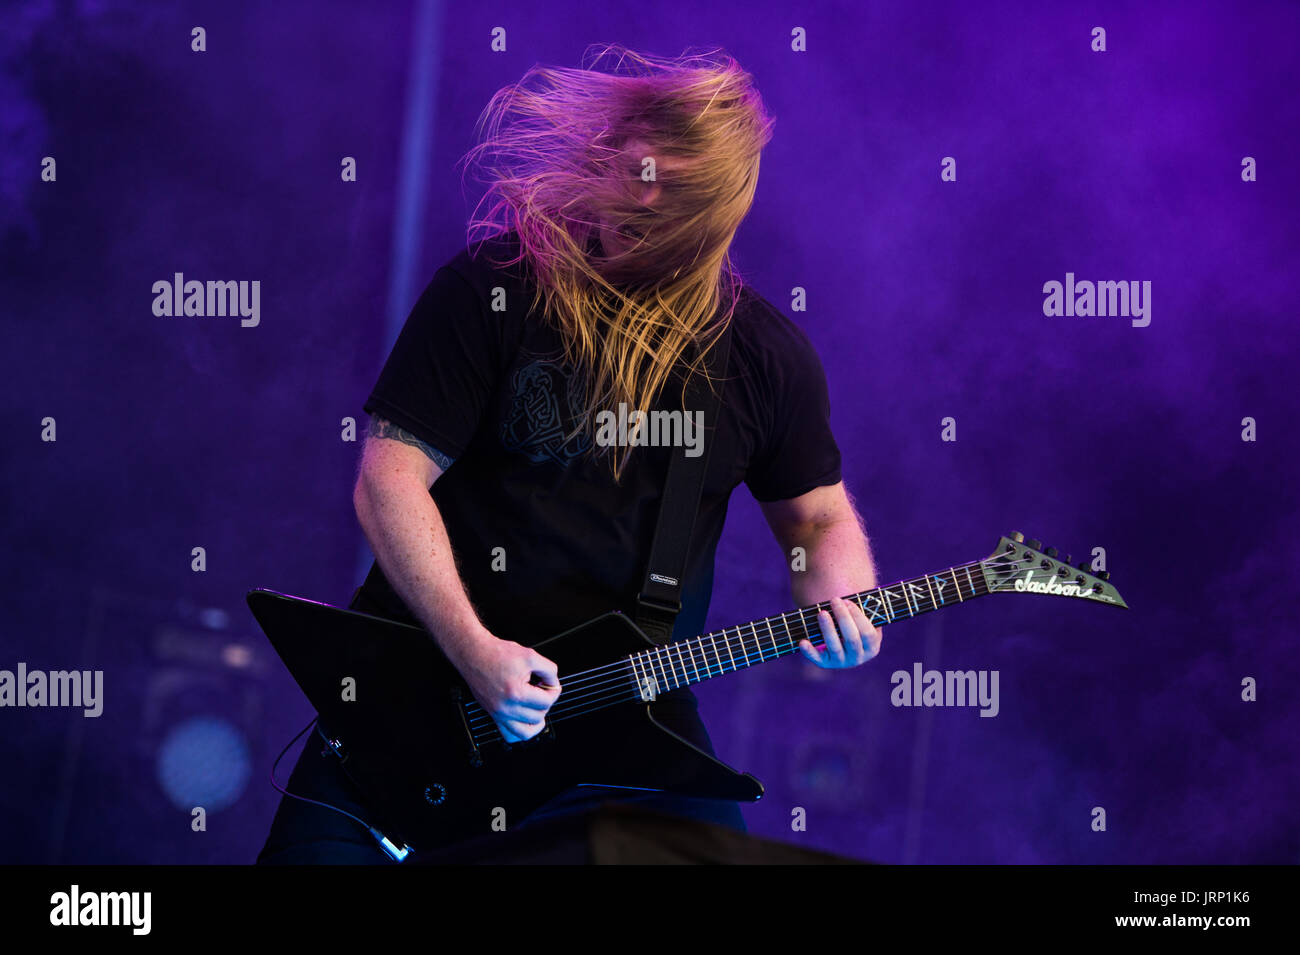 Wacken, Germany. 05th Aug, 2017. Olavi Mikkonen, guitar player of the  melodic death metal band "Amon Amarth", performing on the Harder Stage of  the Wacken Open Air Festival in Wacken, Germany, 05